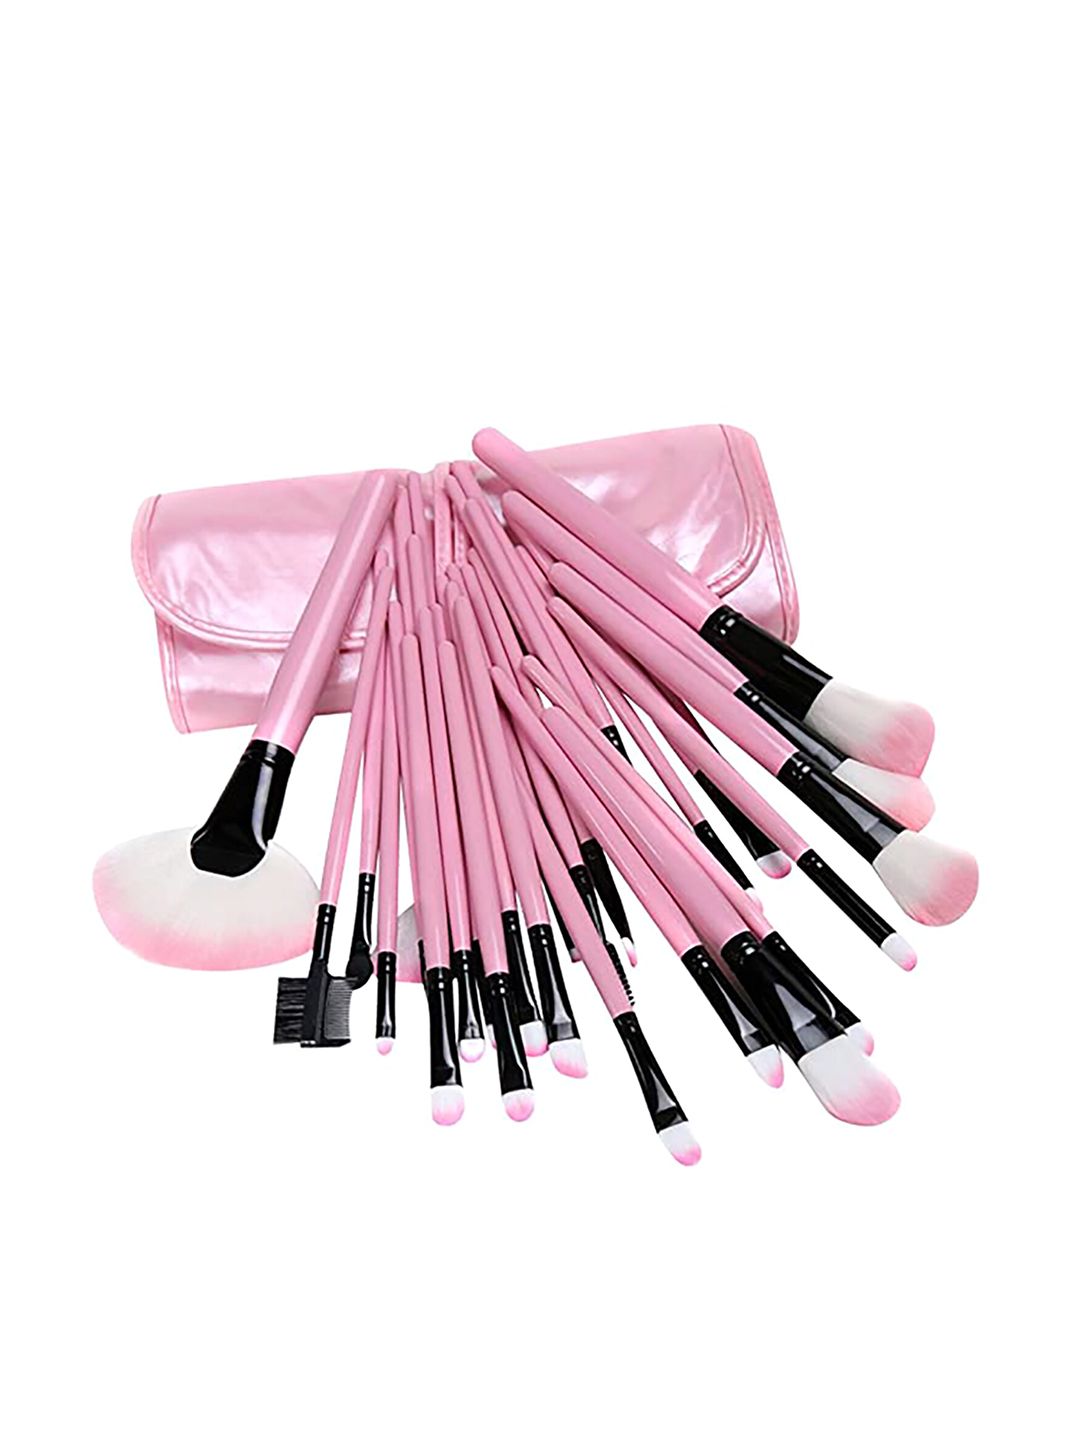 Ronzille Set of 24 Pink Soft Makeup Brushes Price in India